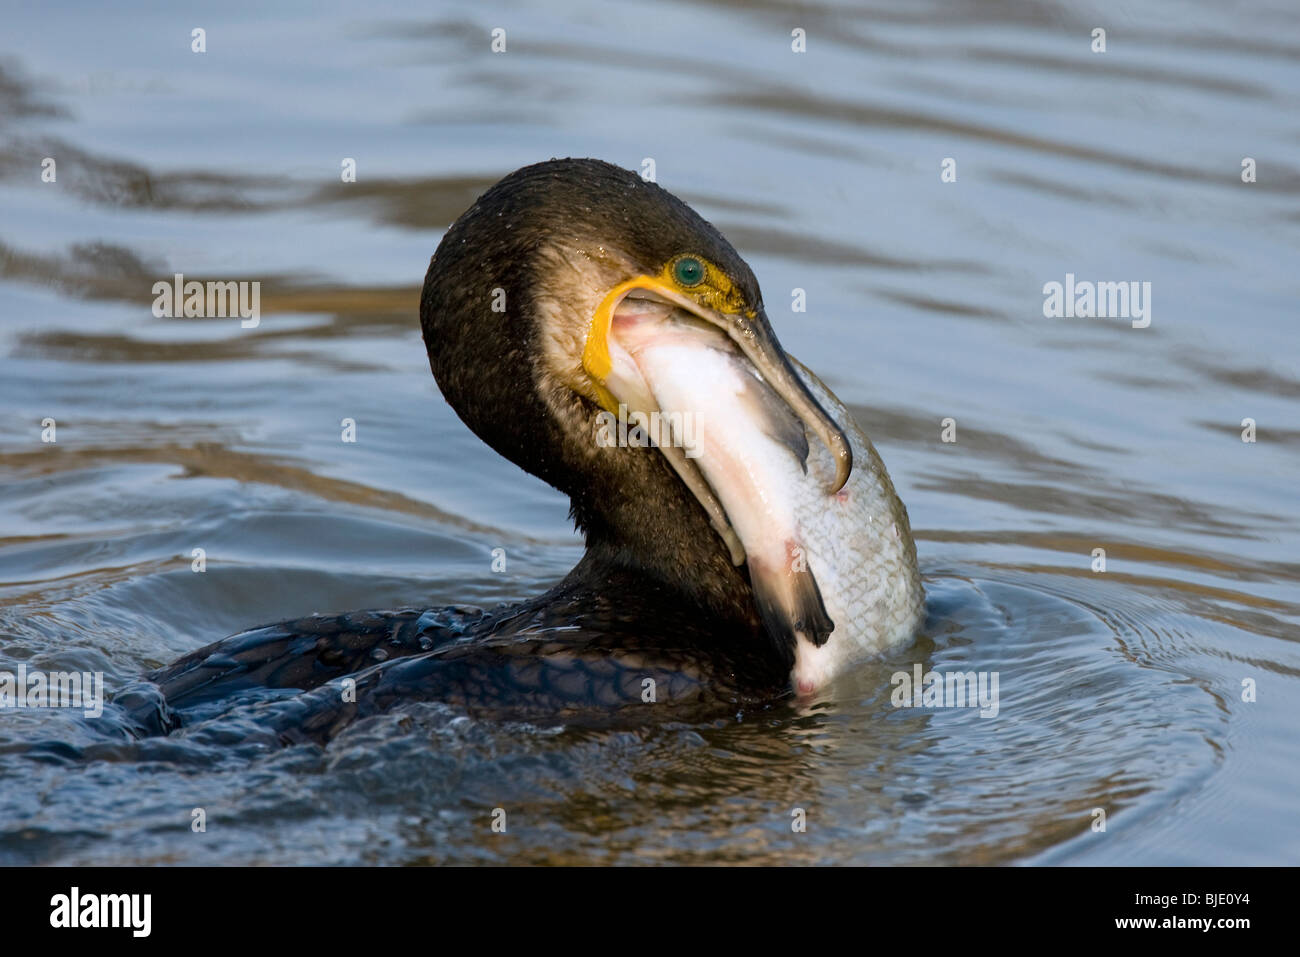 Great cormorant (Phalacrocorax carbo) fishing and catching a Silver bream fish (Blicca bjoerkna) in lake Stock Photo